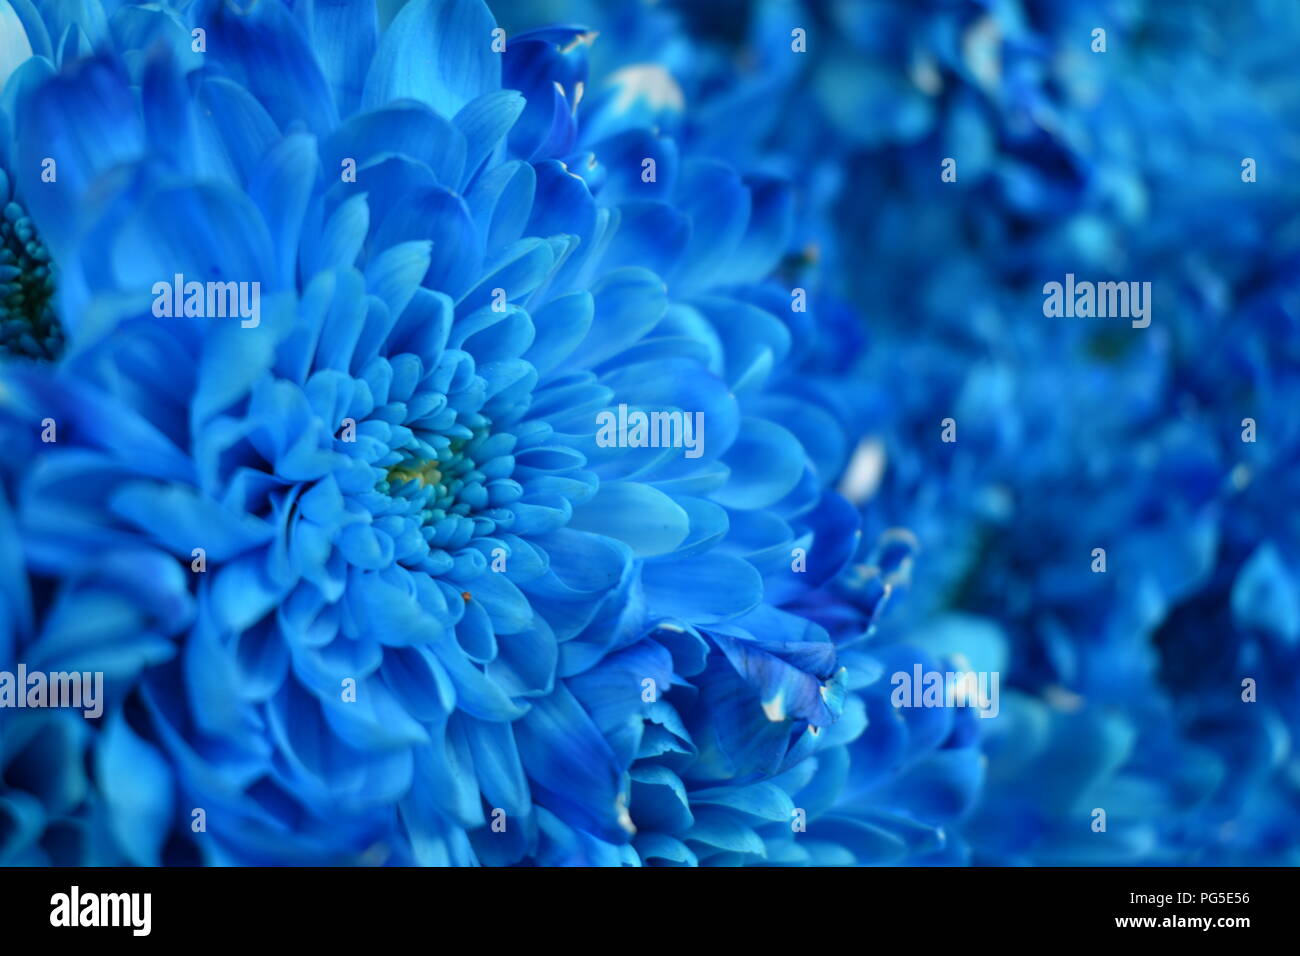 The beauty of chrysanthemum. Really is a beautiful flower with its light blue color  and the way it blossoms truly capture my eyes. Stock Photo